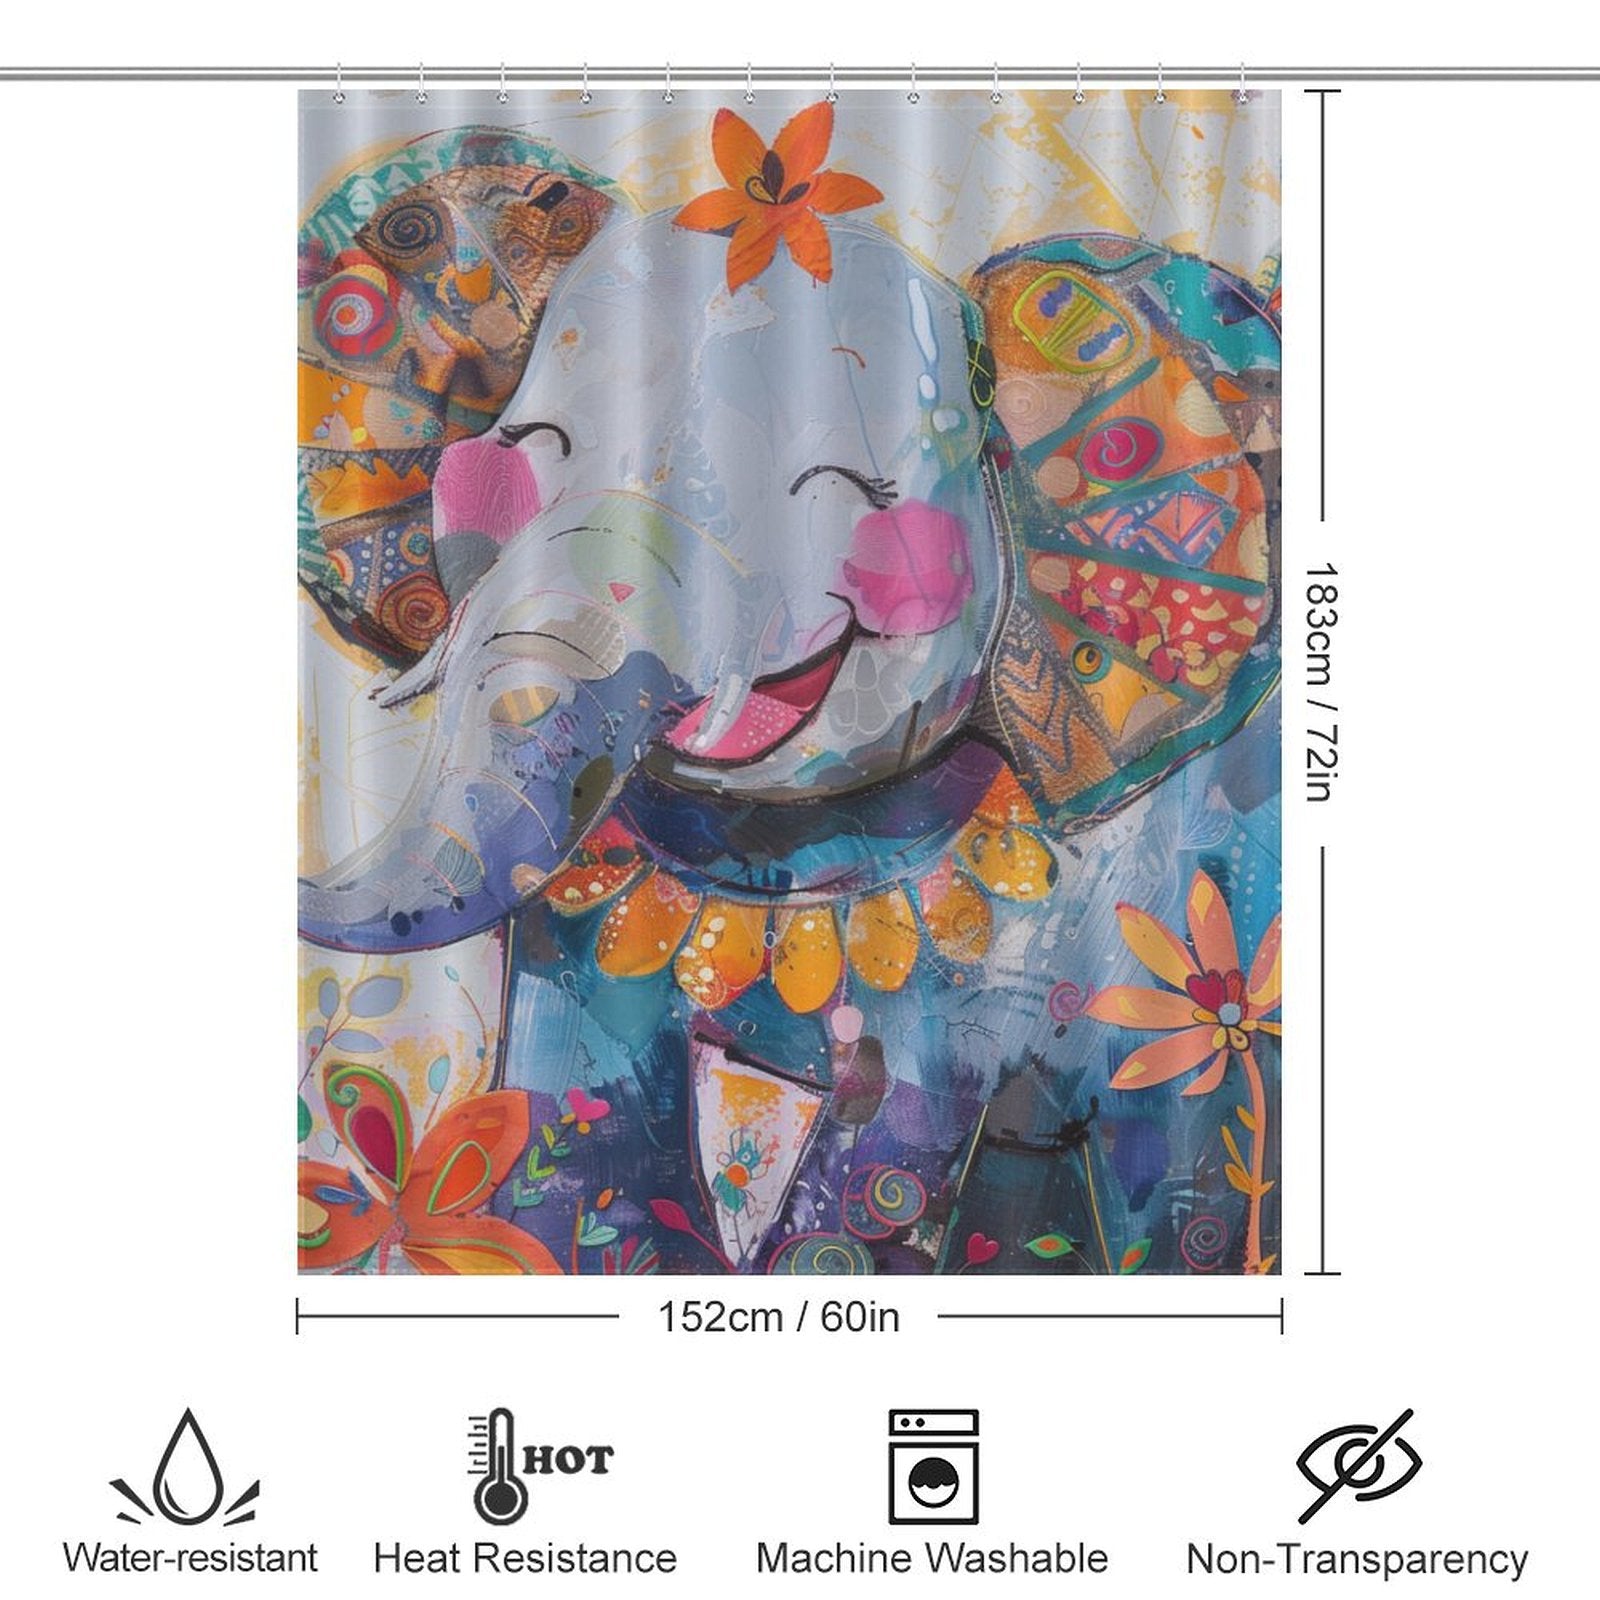 Colorful shower curtain featuring a cheerful, abstract design of a cute baby happy elephant with a flower on its head. The dimensions are 183 cm by 152 cm. This eye-catching bathroom decor is water-resistant, heat-resistant, and machine washable. Introducing the Cute Baby Happy Elephant and Flowers Shower Curtain-Cottoncat by Cotton Cat.